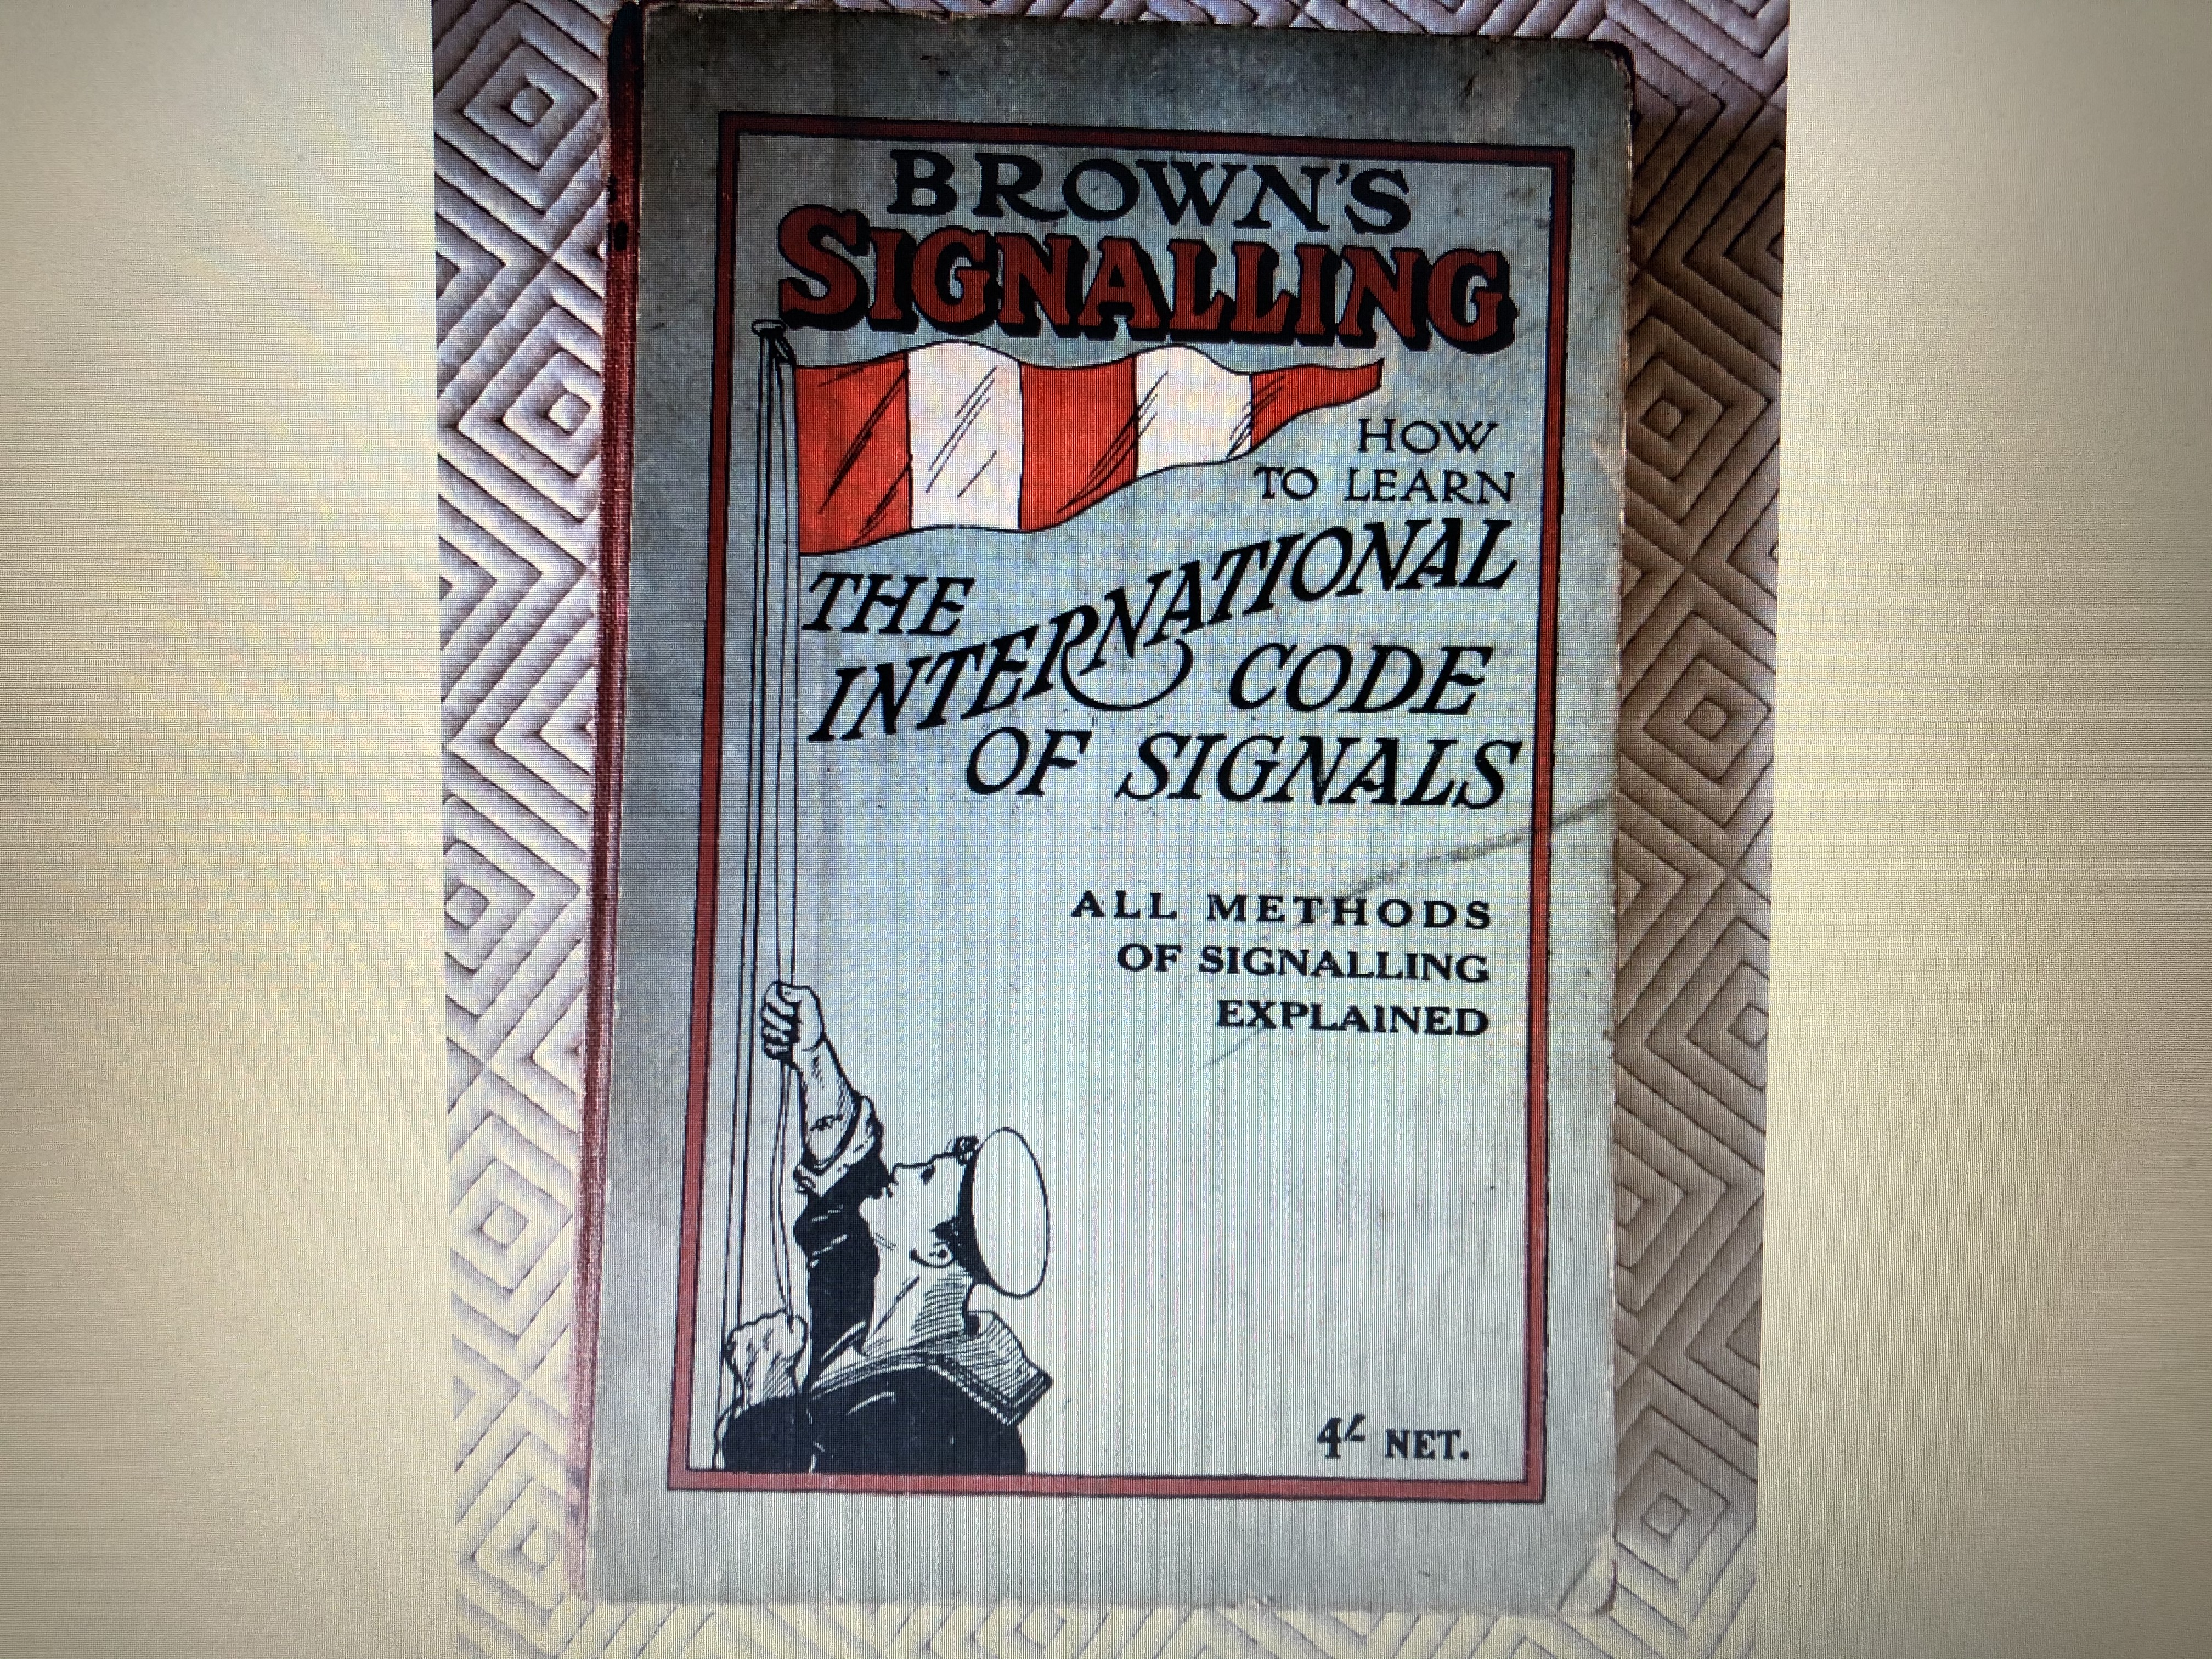 ORIGINAL EARLY EDITION BOOK FROM 1941 ENTITLED BROWN'S SIGNALLING